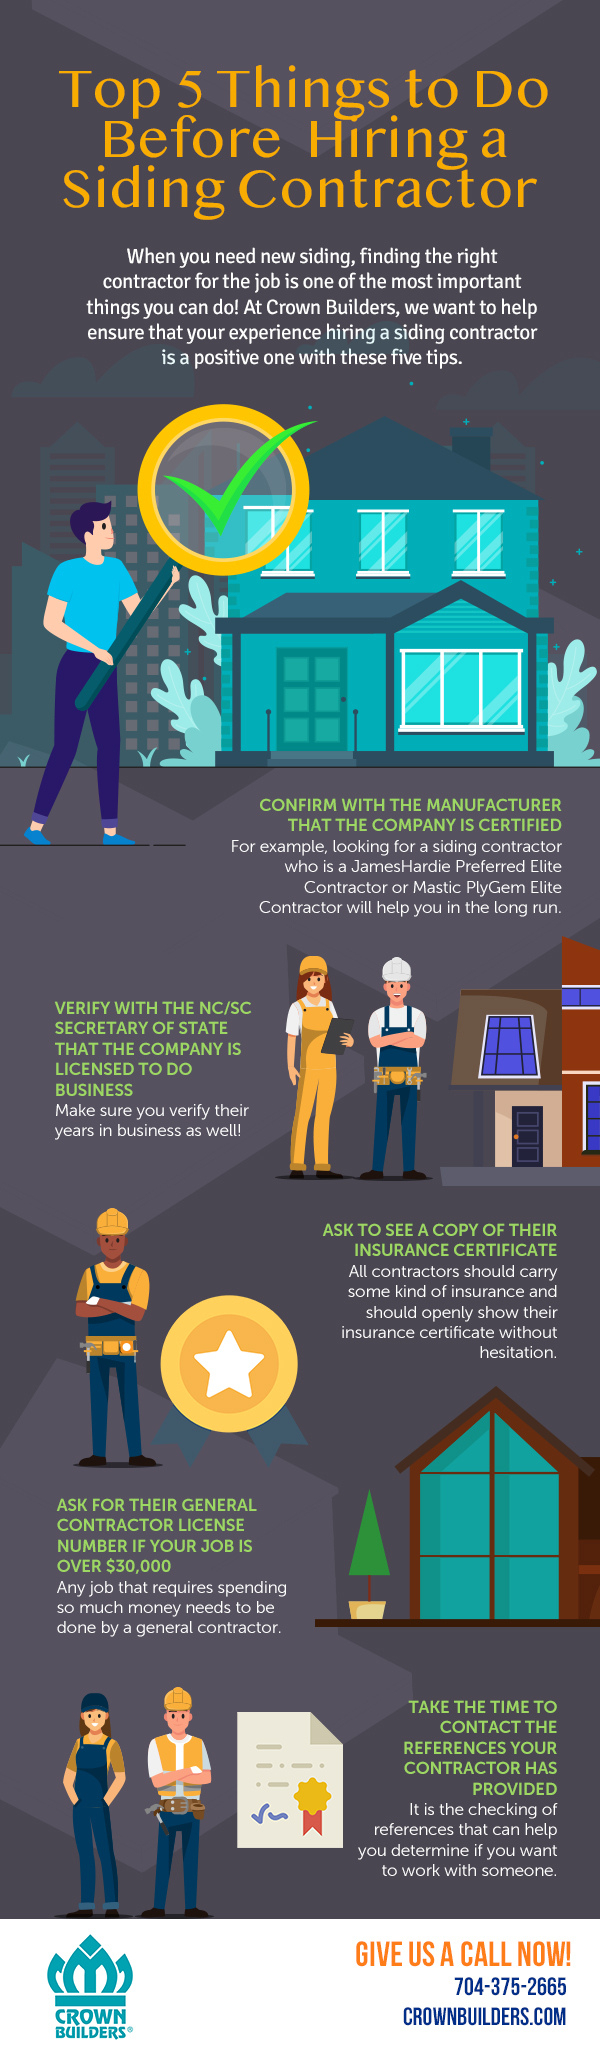 Top 5 Things to Do Before Hiring a Siding Contractor [infographic]